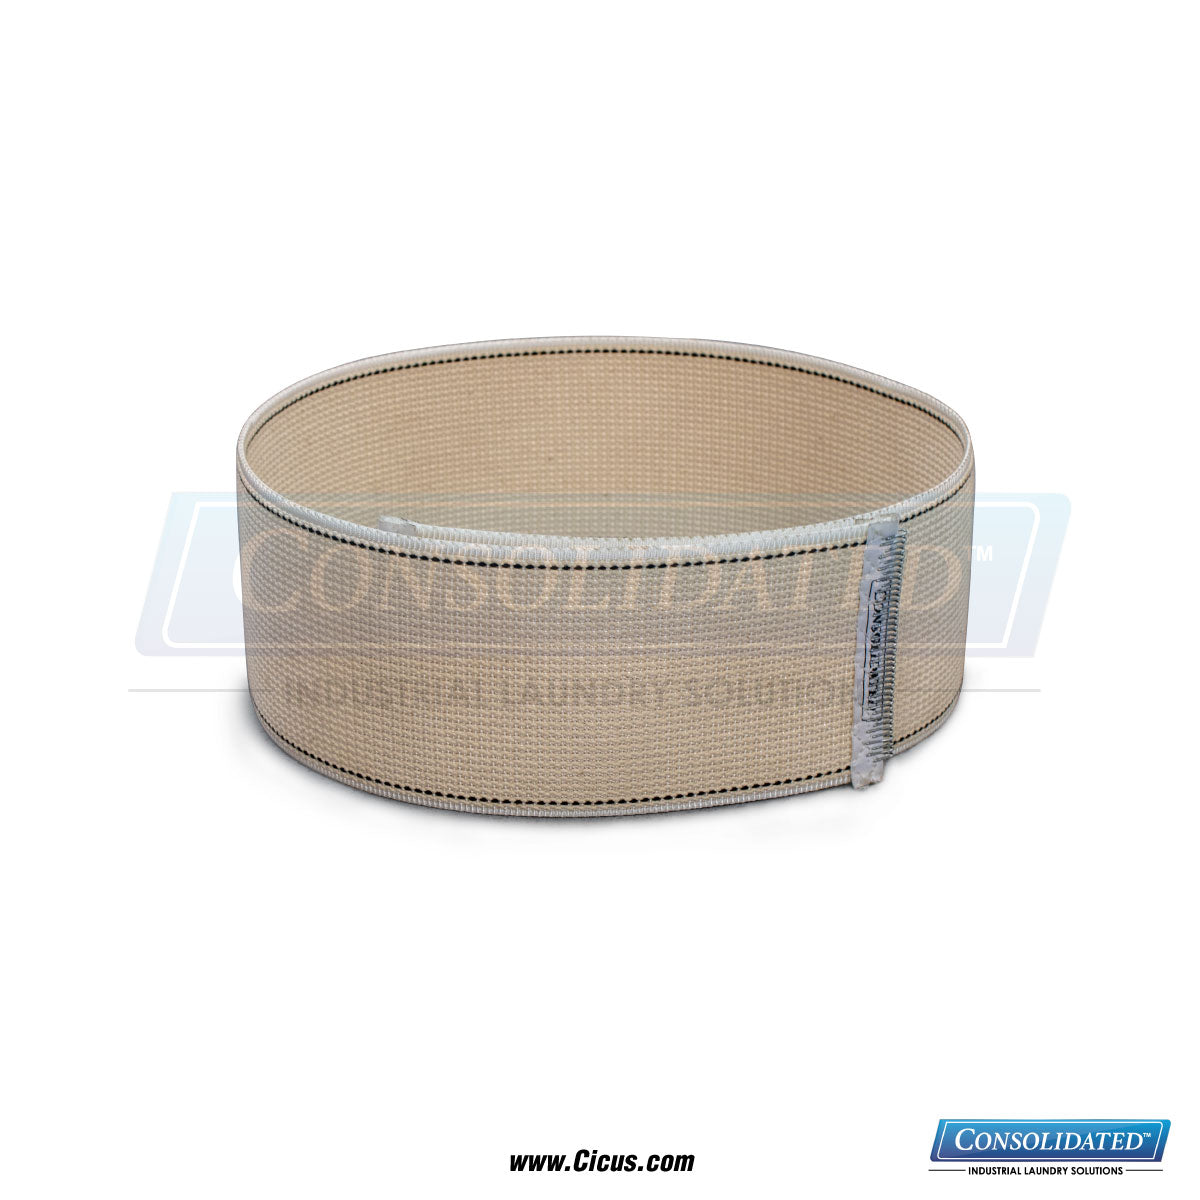 CIC Exclusive Chicago Dryer Canvas Ribbon - 1" x 87" (1001-262)